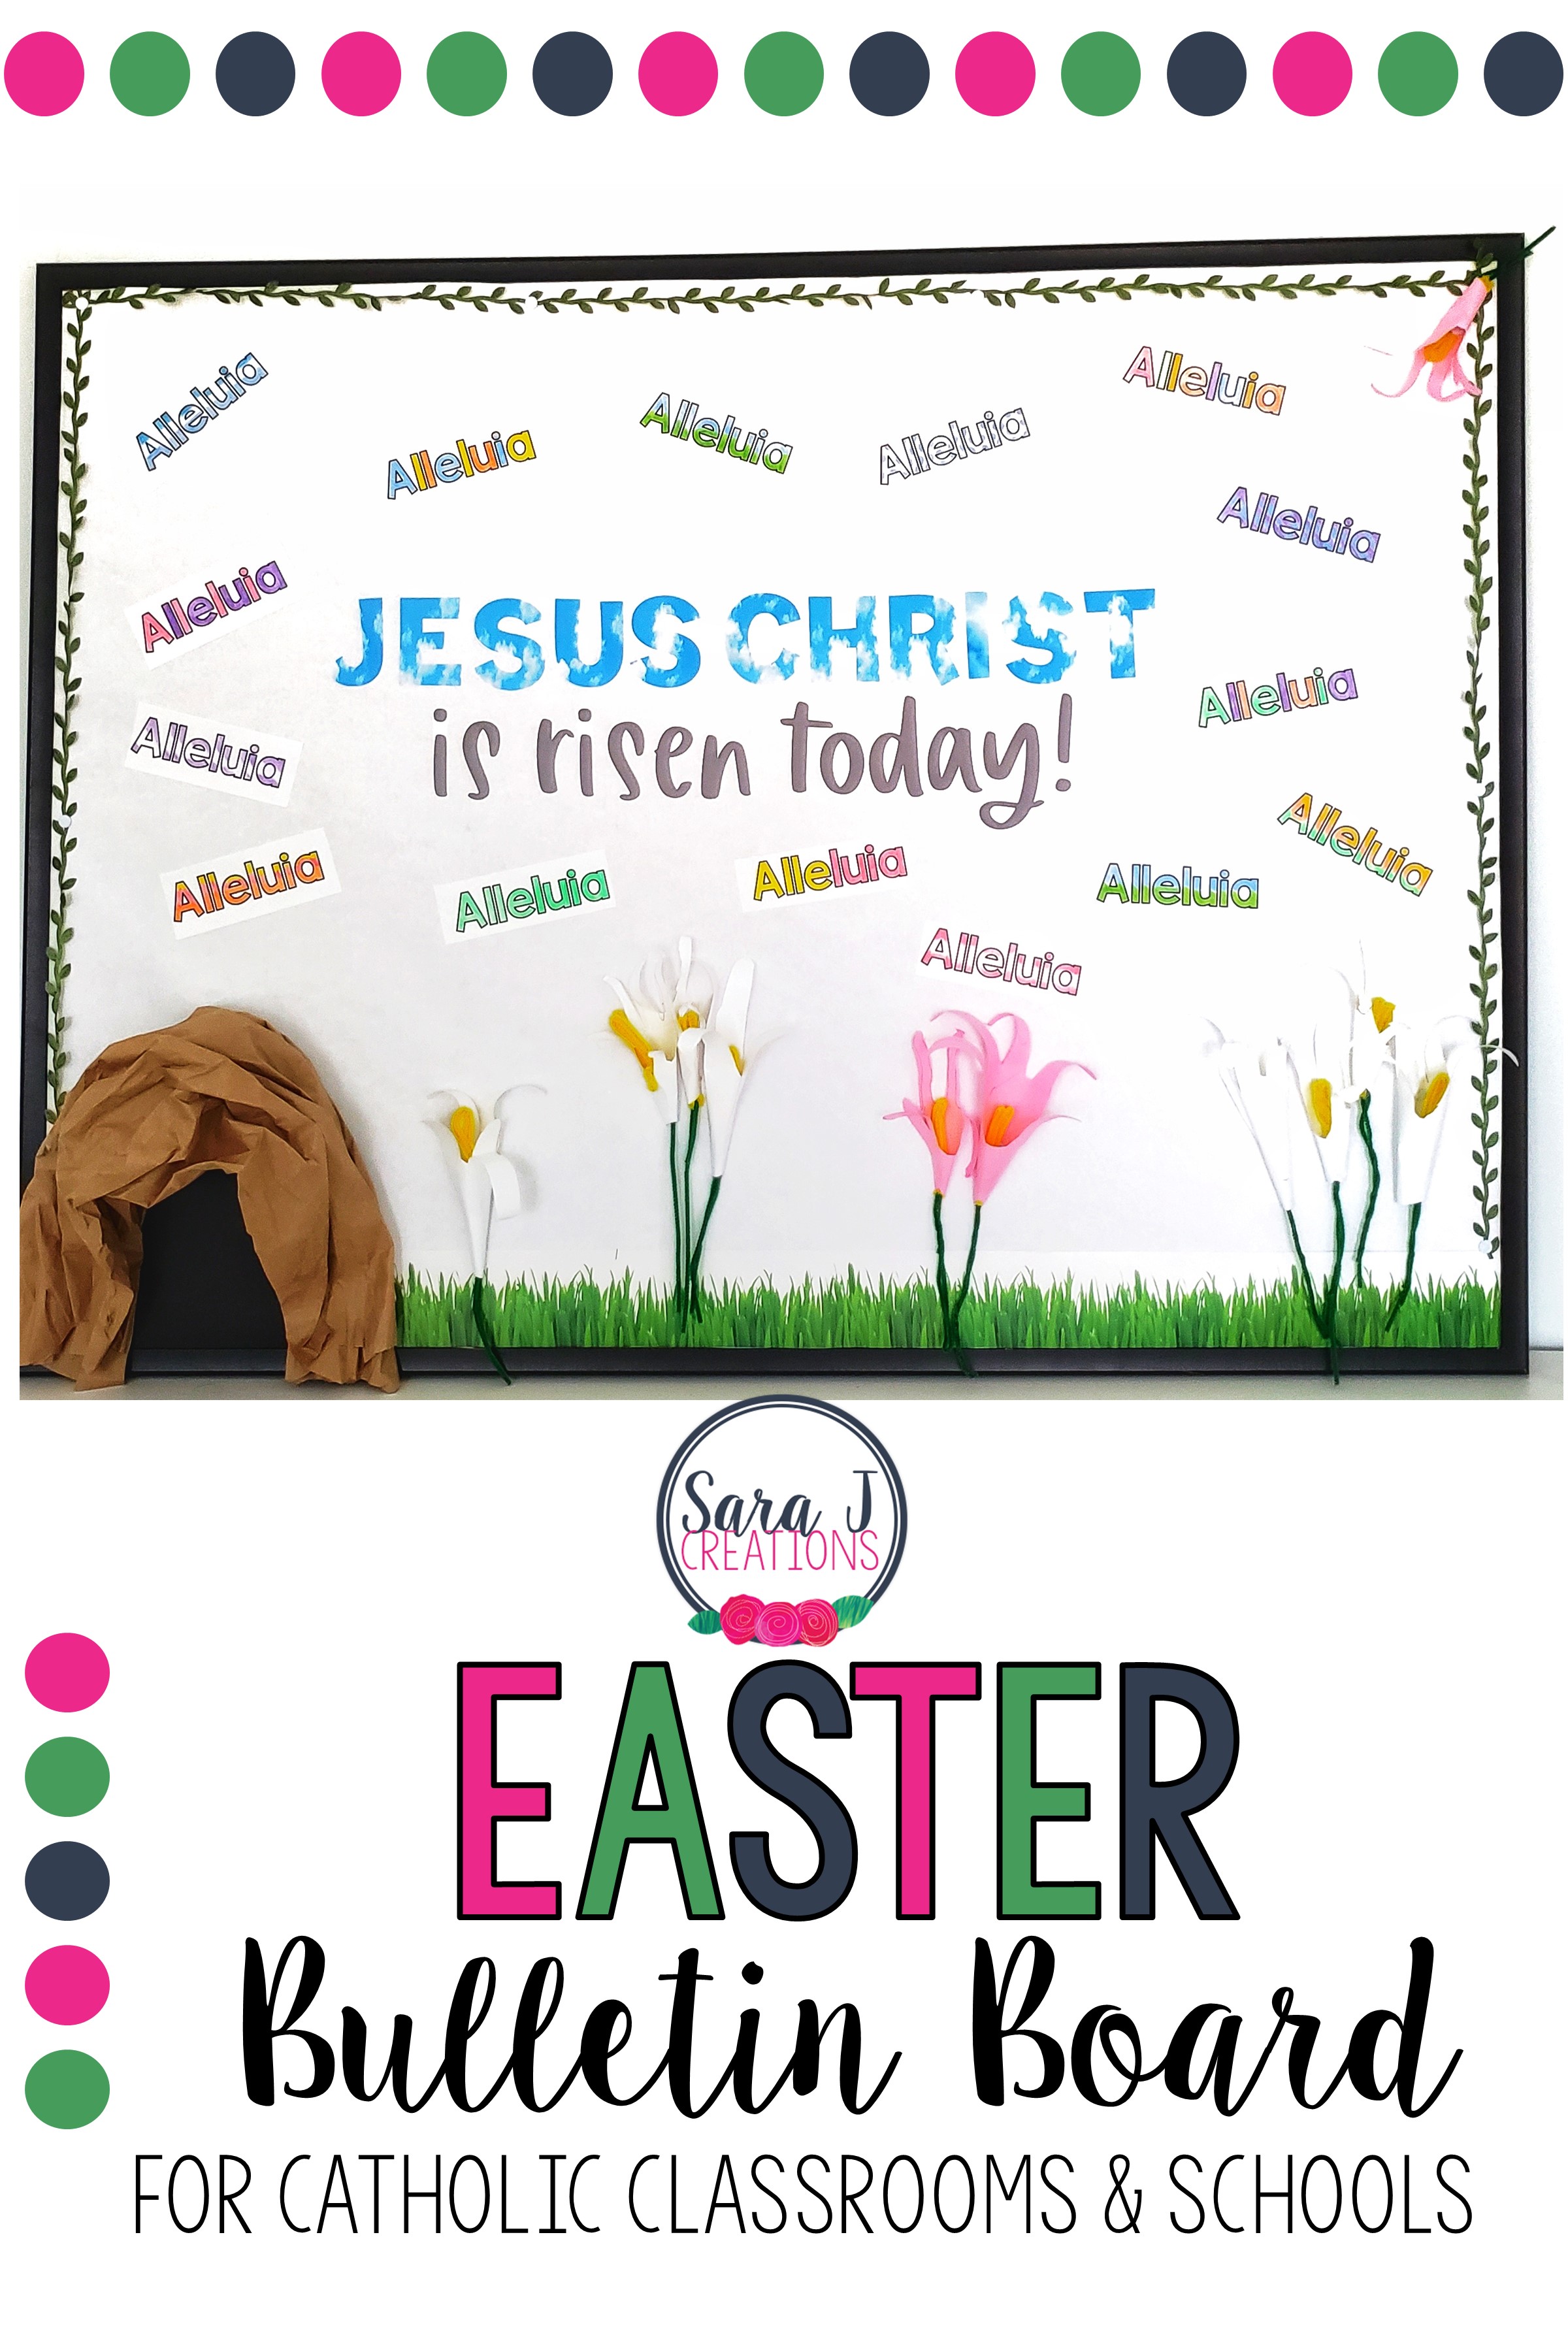 Celebrate Easter with this fun religious bulletin board  - Jesus Christ is risen today! Alleluia!